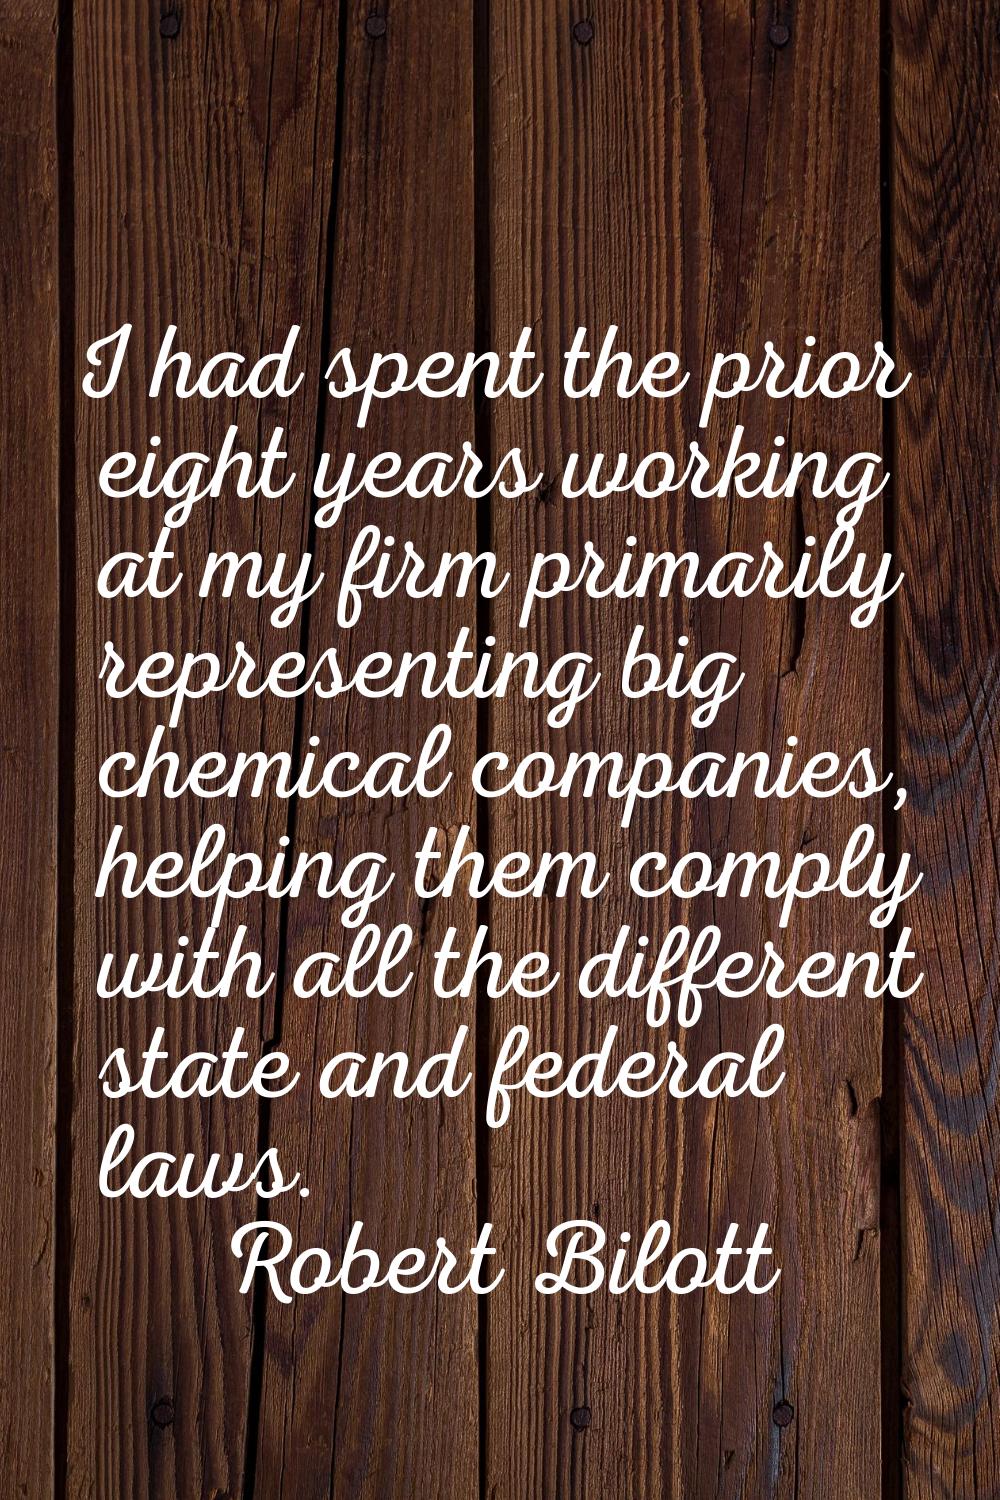 I had spent the prior eight years working at my firm primarily representing big chemical companies,